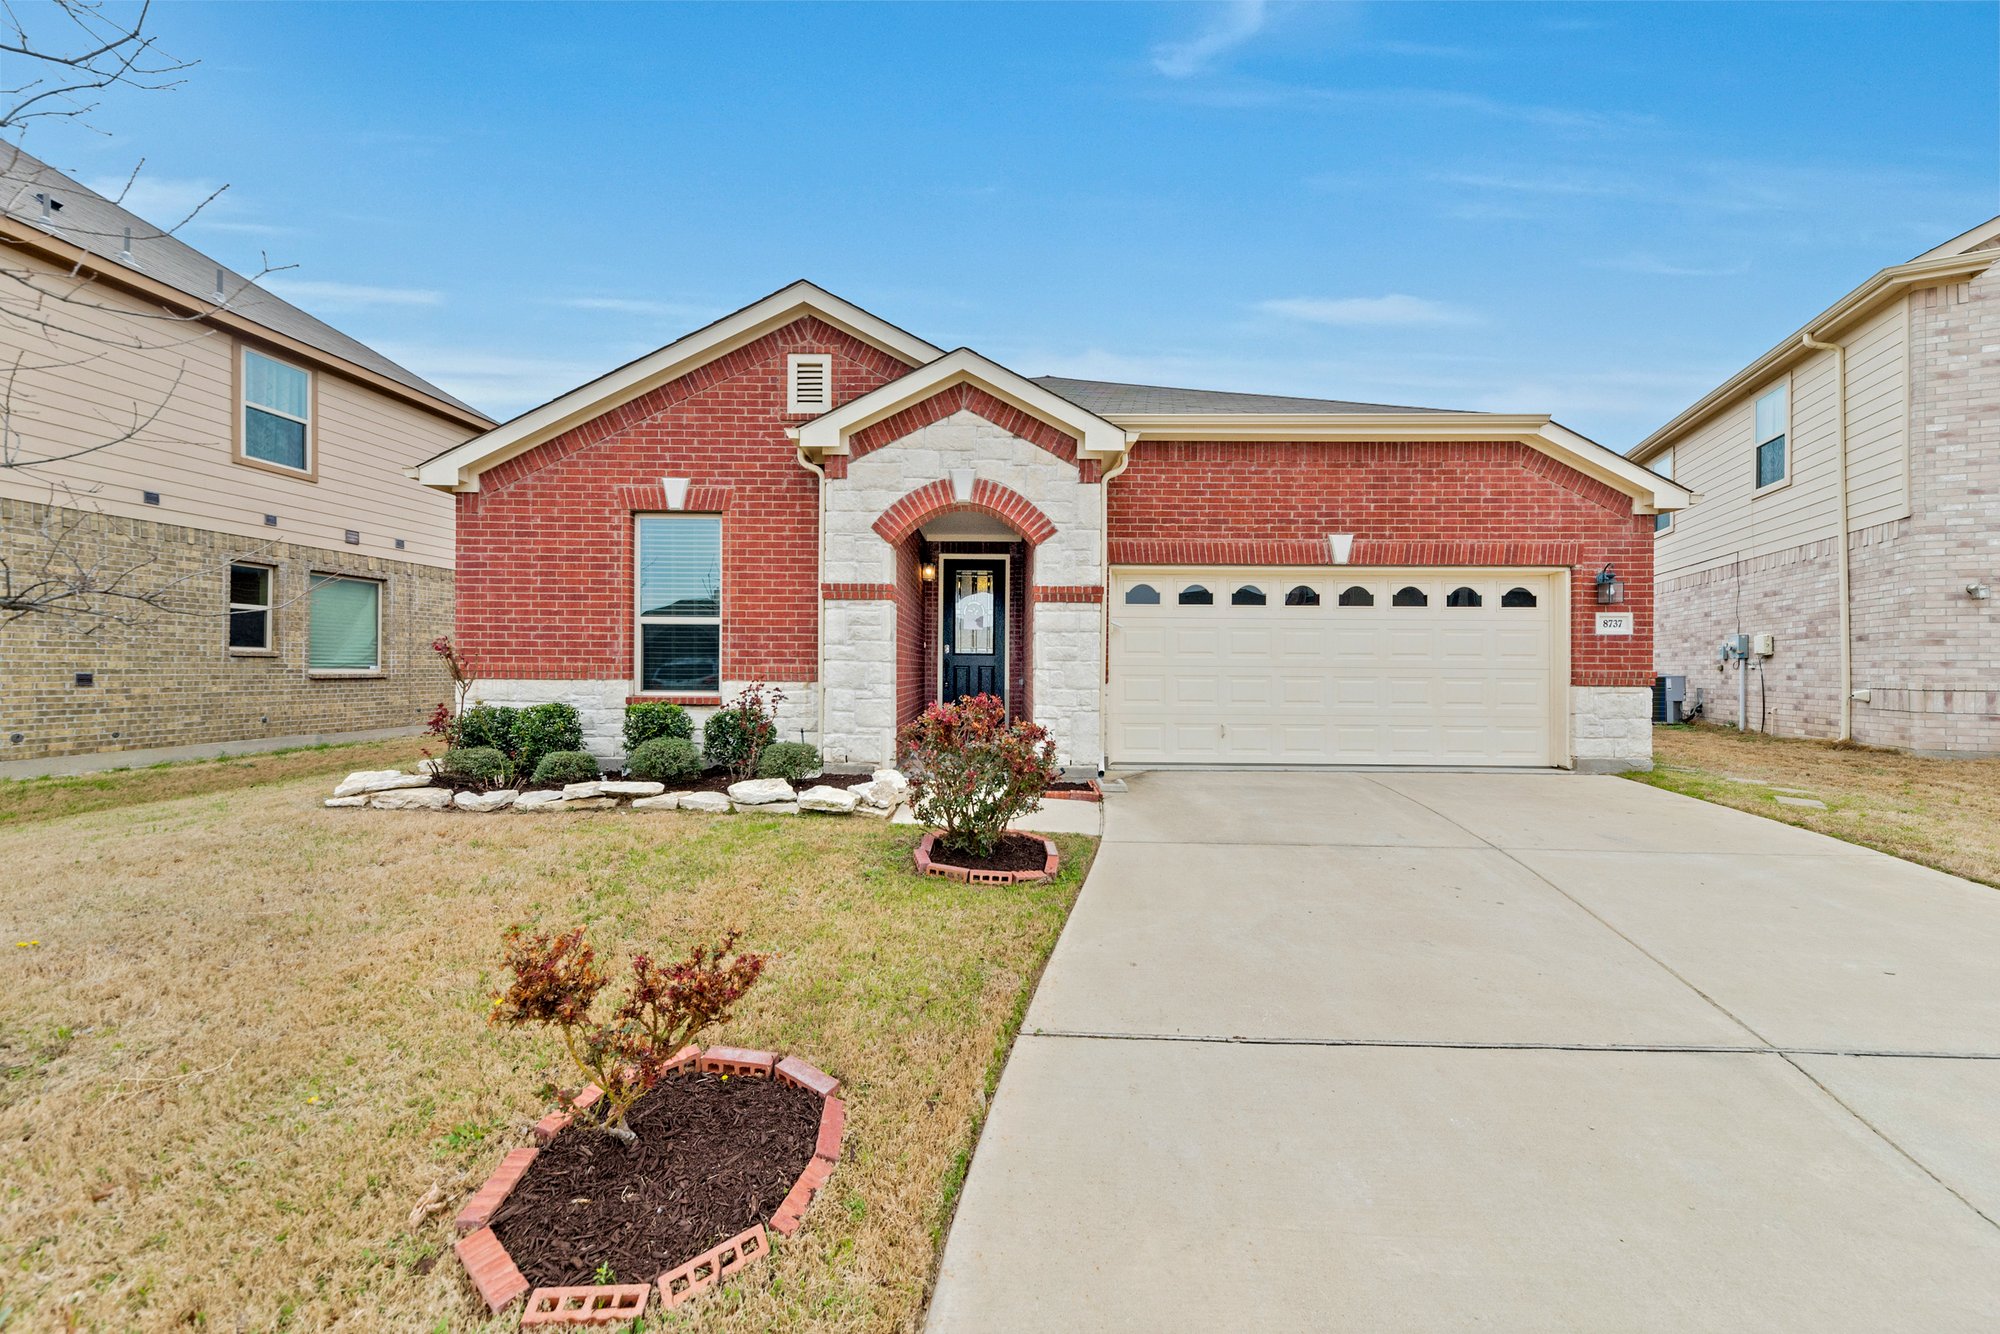 Photo 1 of 26 - 8737 Stone Valley Dr, Fort Worth, TX 76244